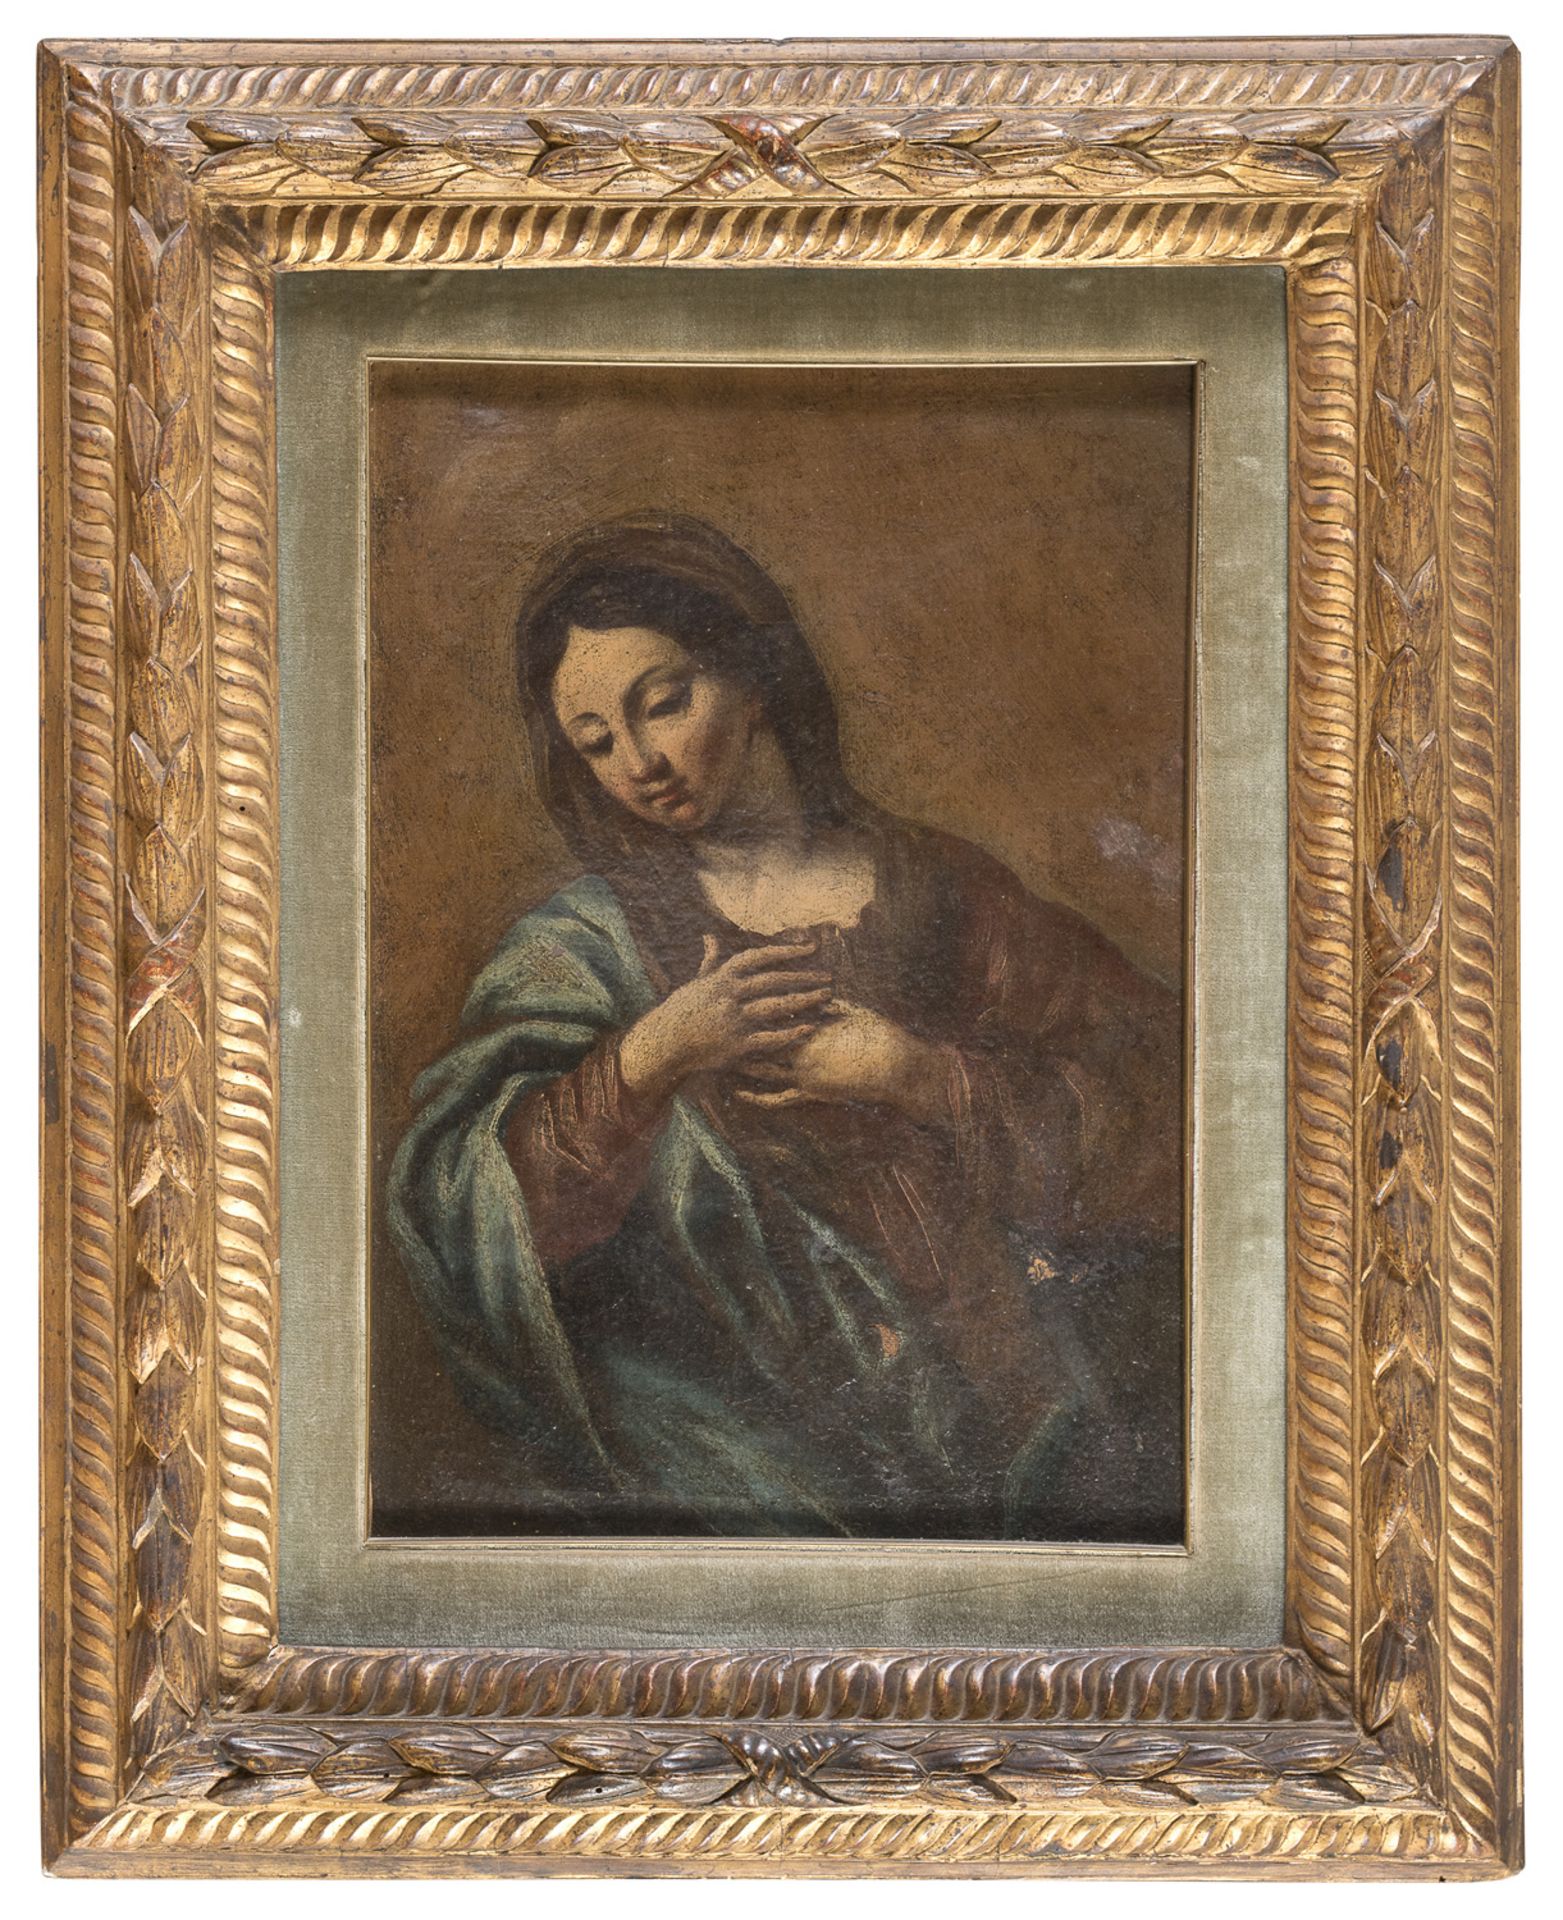 OIL PAINTING OF VIRGIN AT THE PRAYER 18TH CENTURY